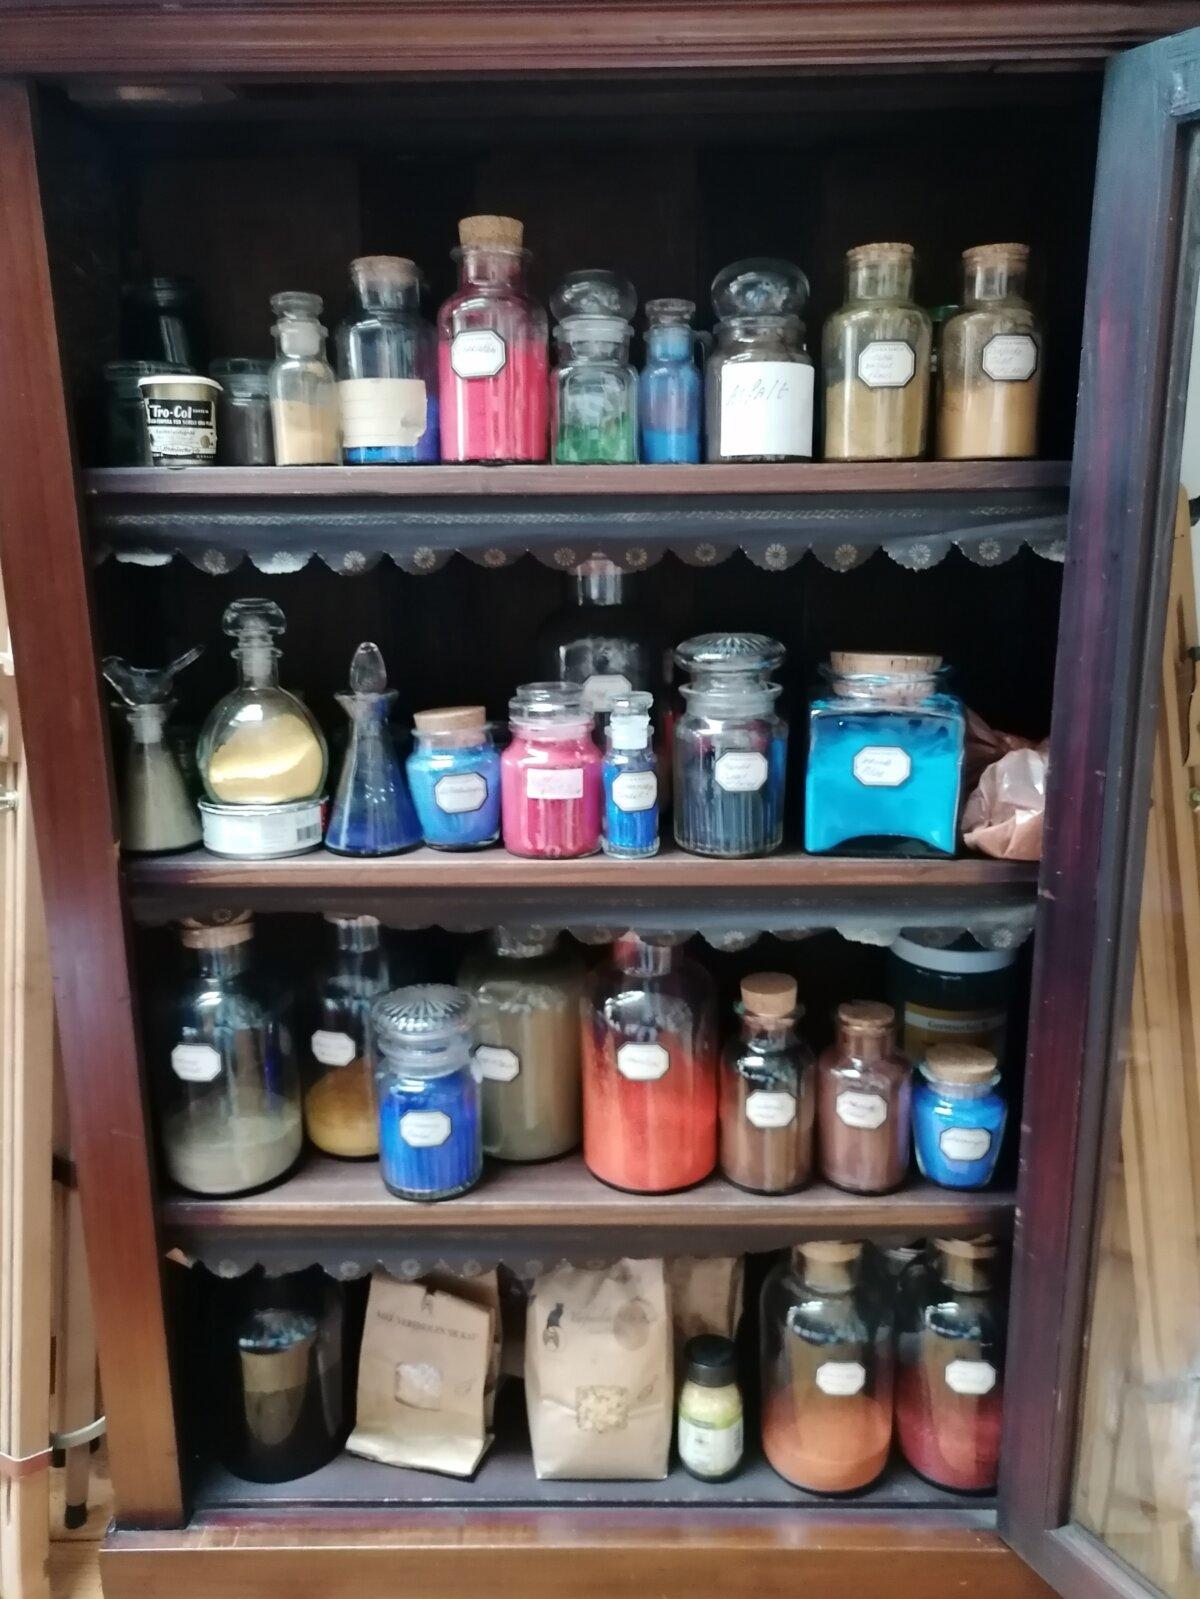 Nard Kwast's pigmentation cupboard is full of carefully sourced materials frequently used in 17th-century paintings, including vermillion, lead white, and lapis lazuli. (Courtesy of Nard Kwast)